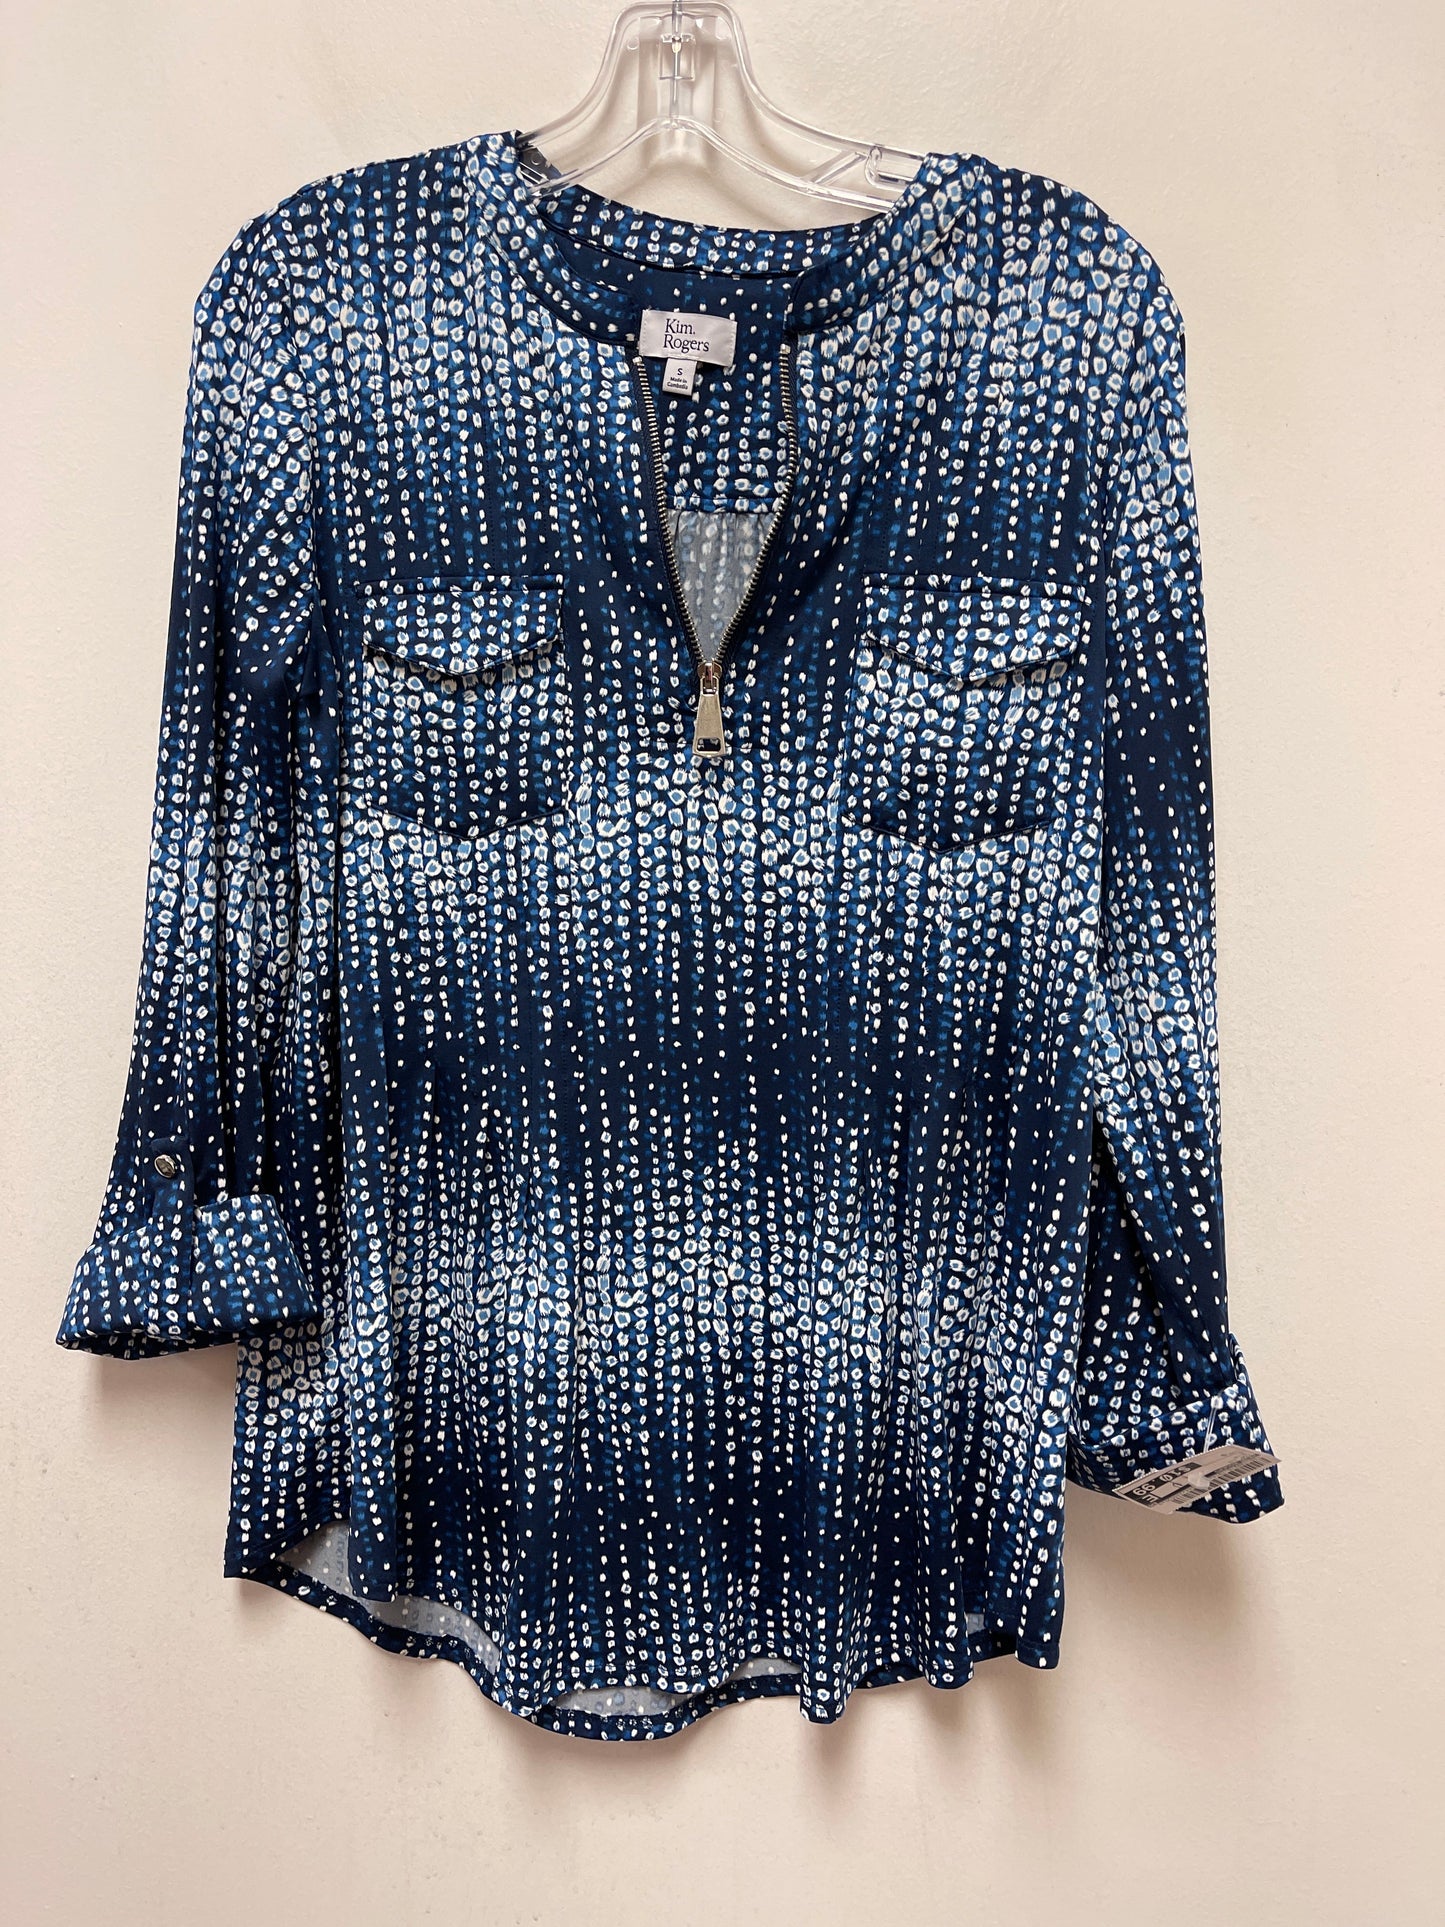 Blue Top Long Sleeve Kim Rogers, Size S